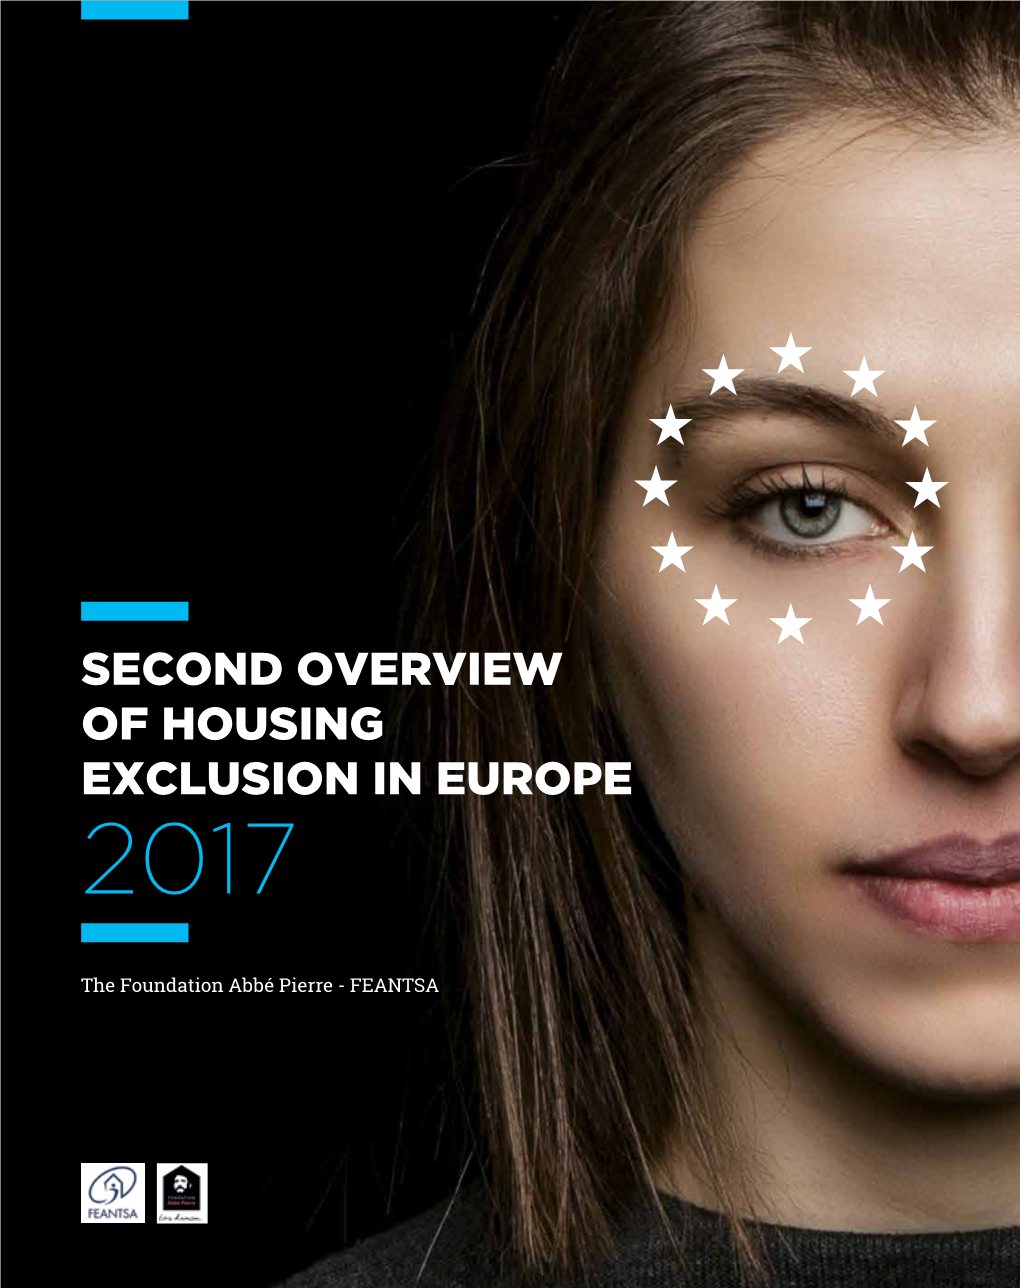 Second Overview of Housing Exclusion in Europe 2017